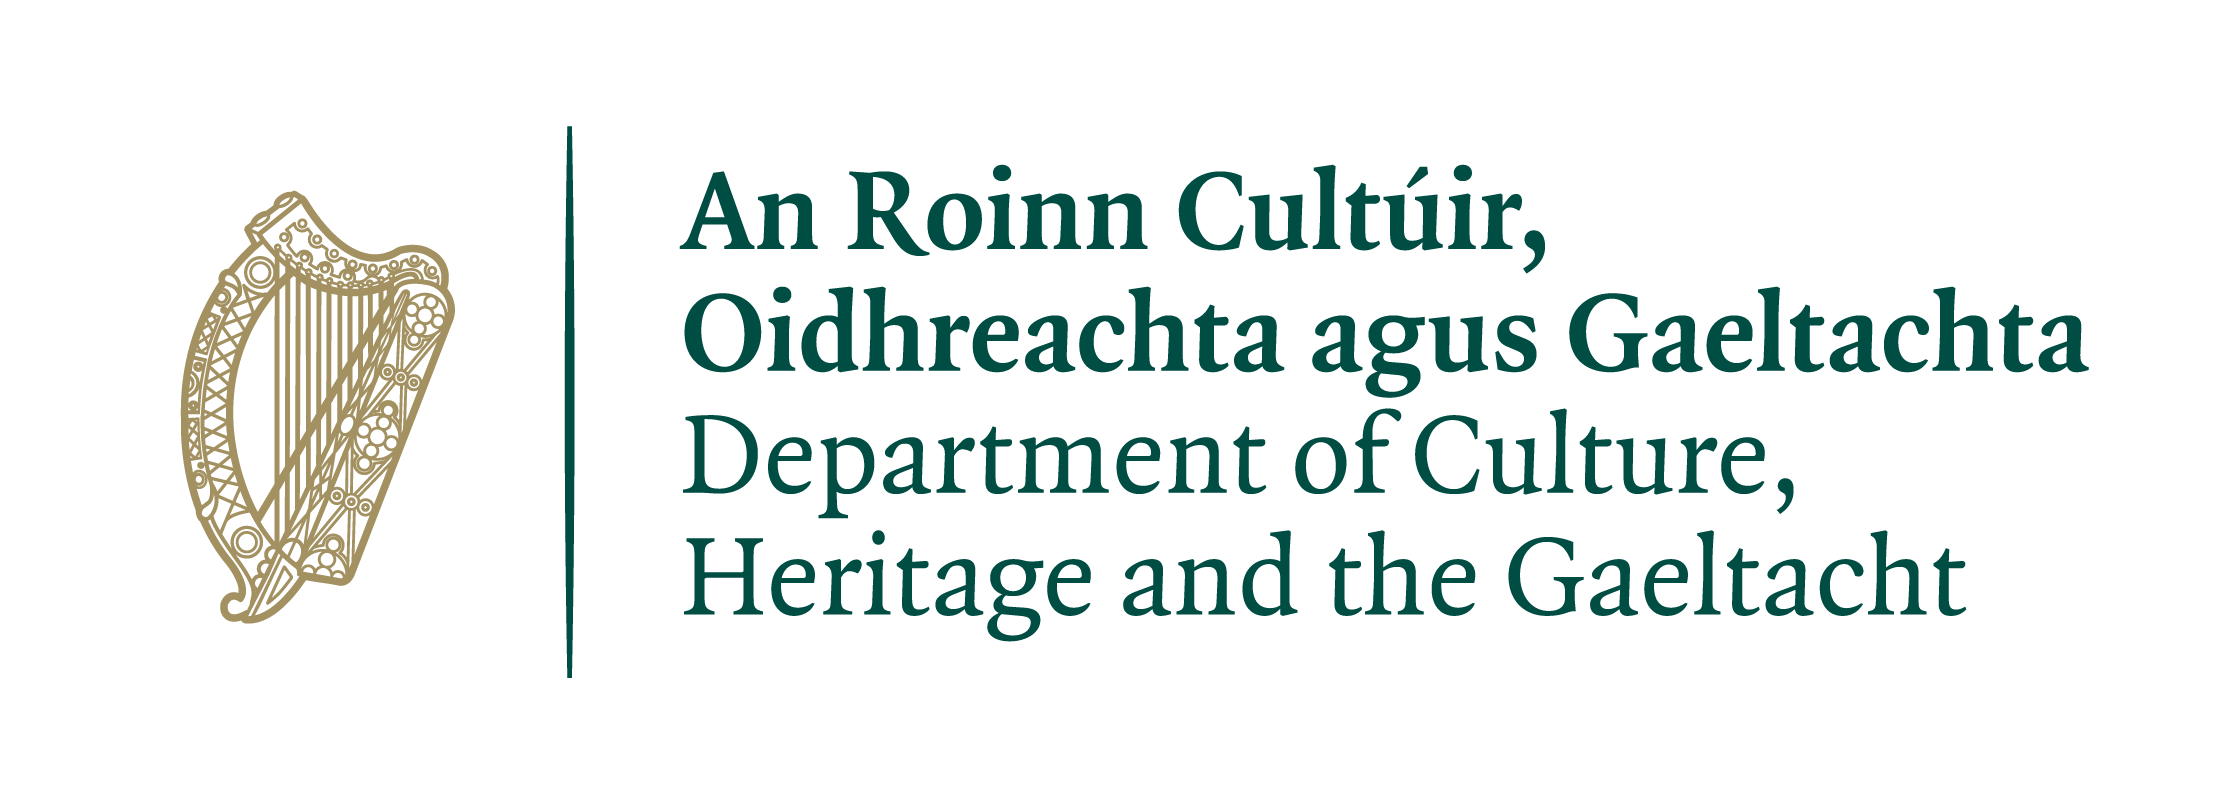 Department of Culture Heritage and the Gaeltacht Logo